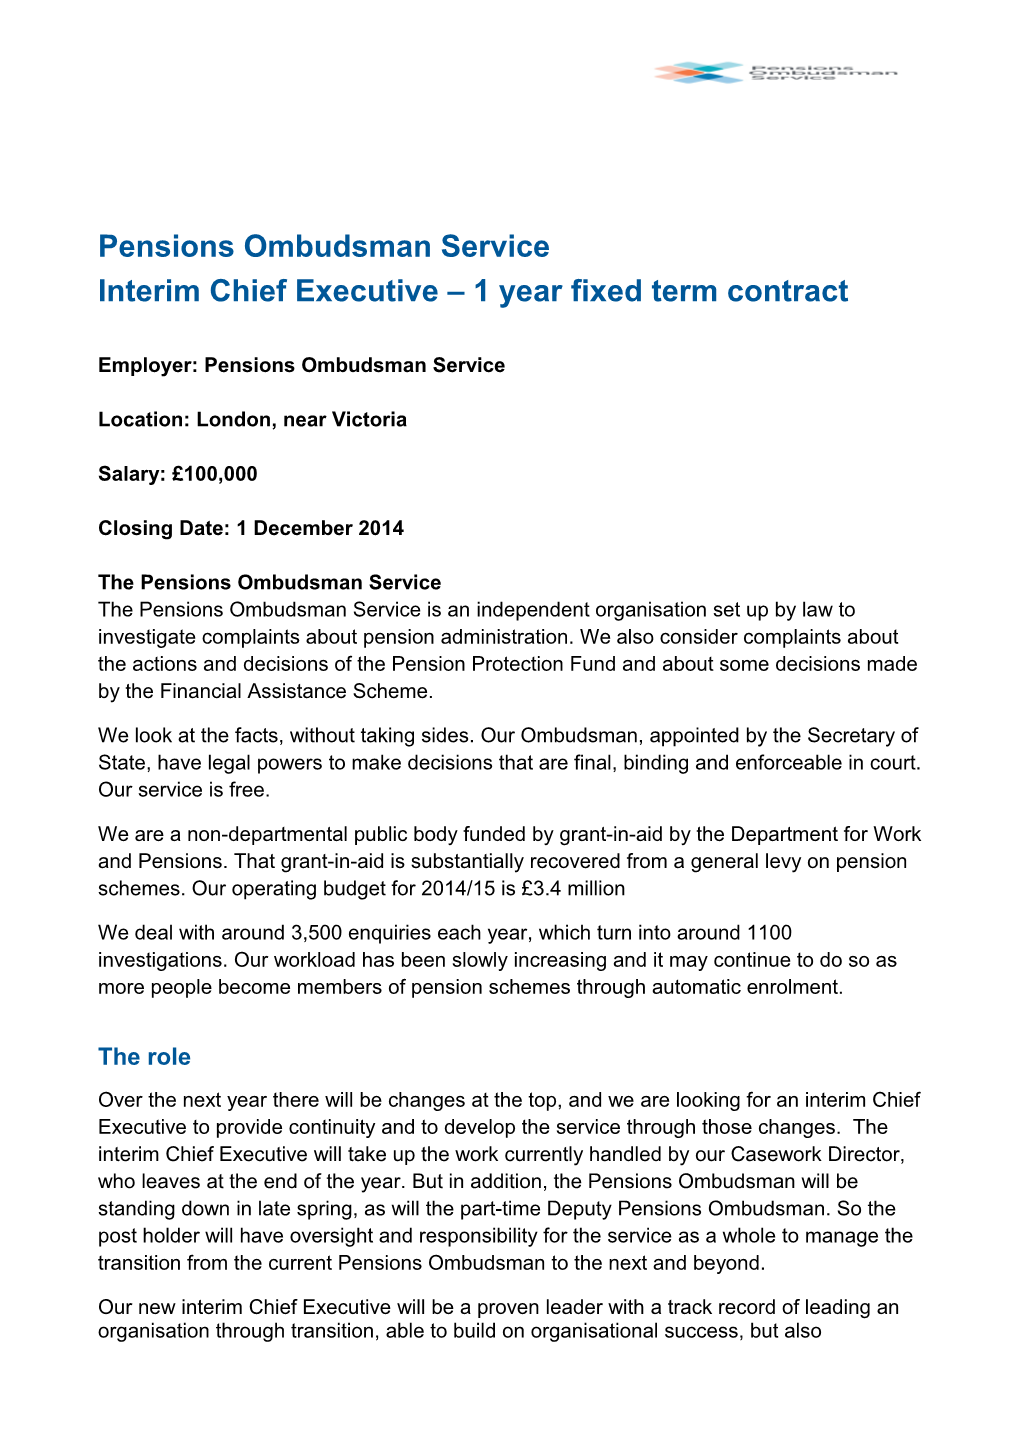 Interim Chief Executive 1 Year Fixed Term Contract